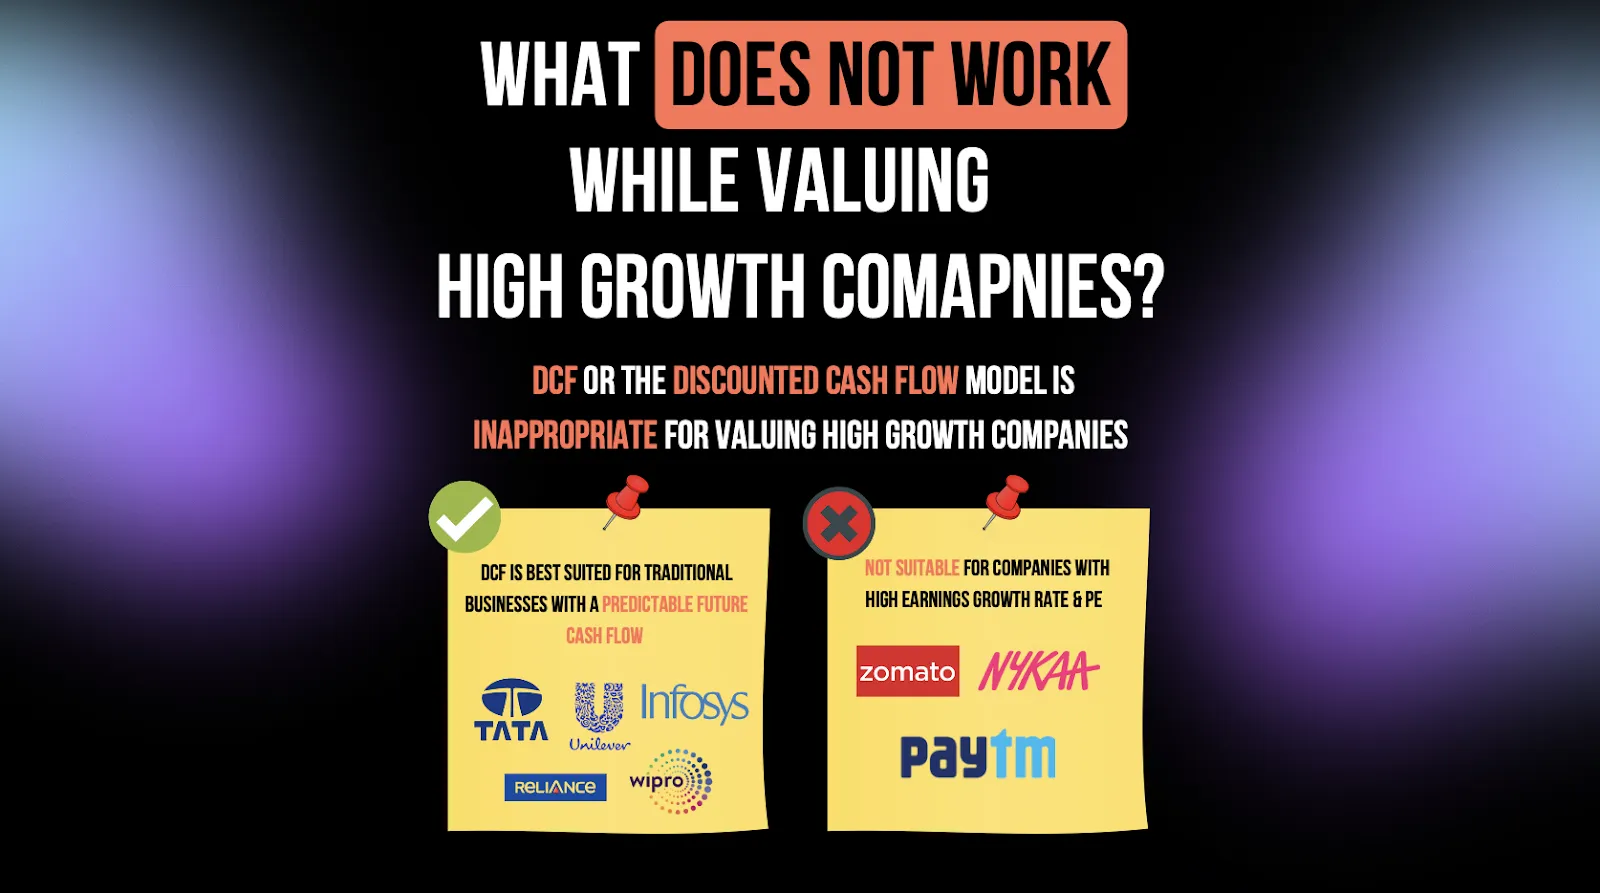 What Does Not Work While Valuing High Growth Companies